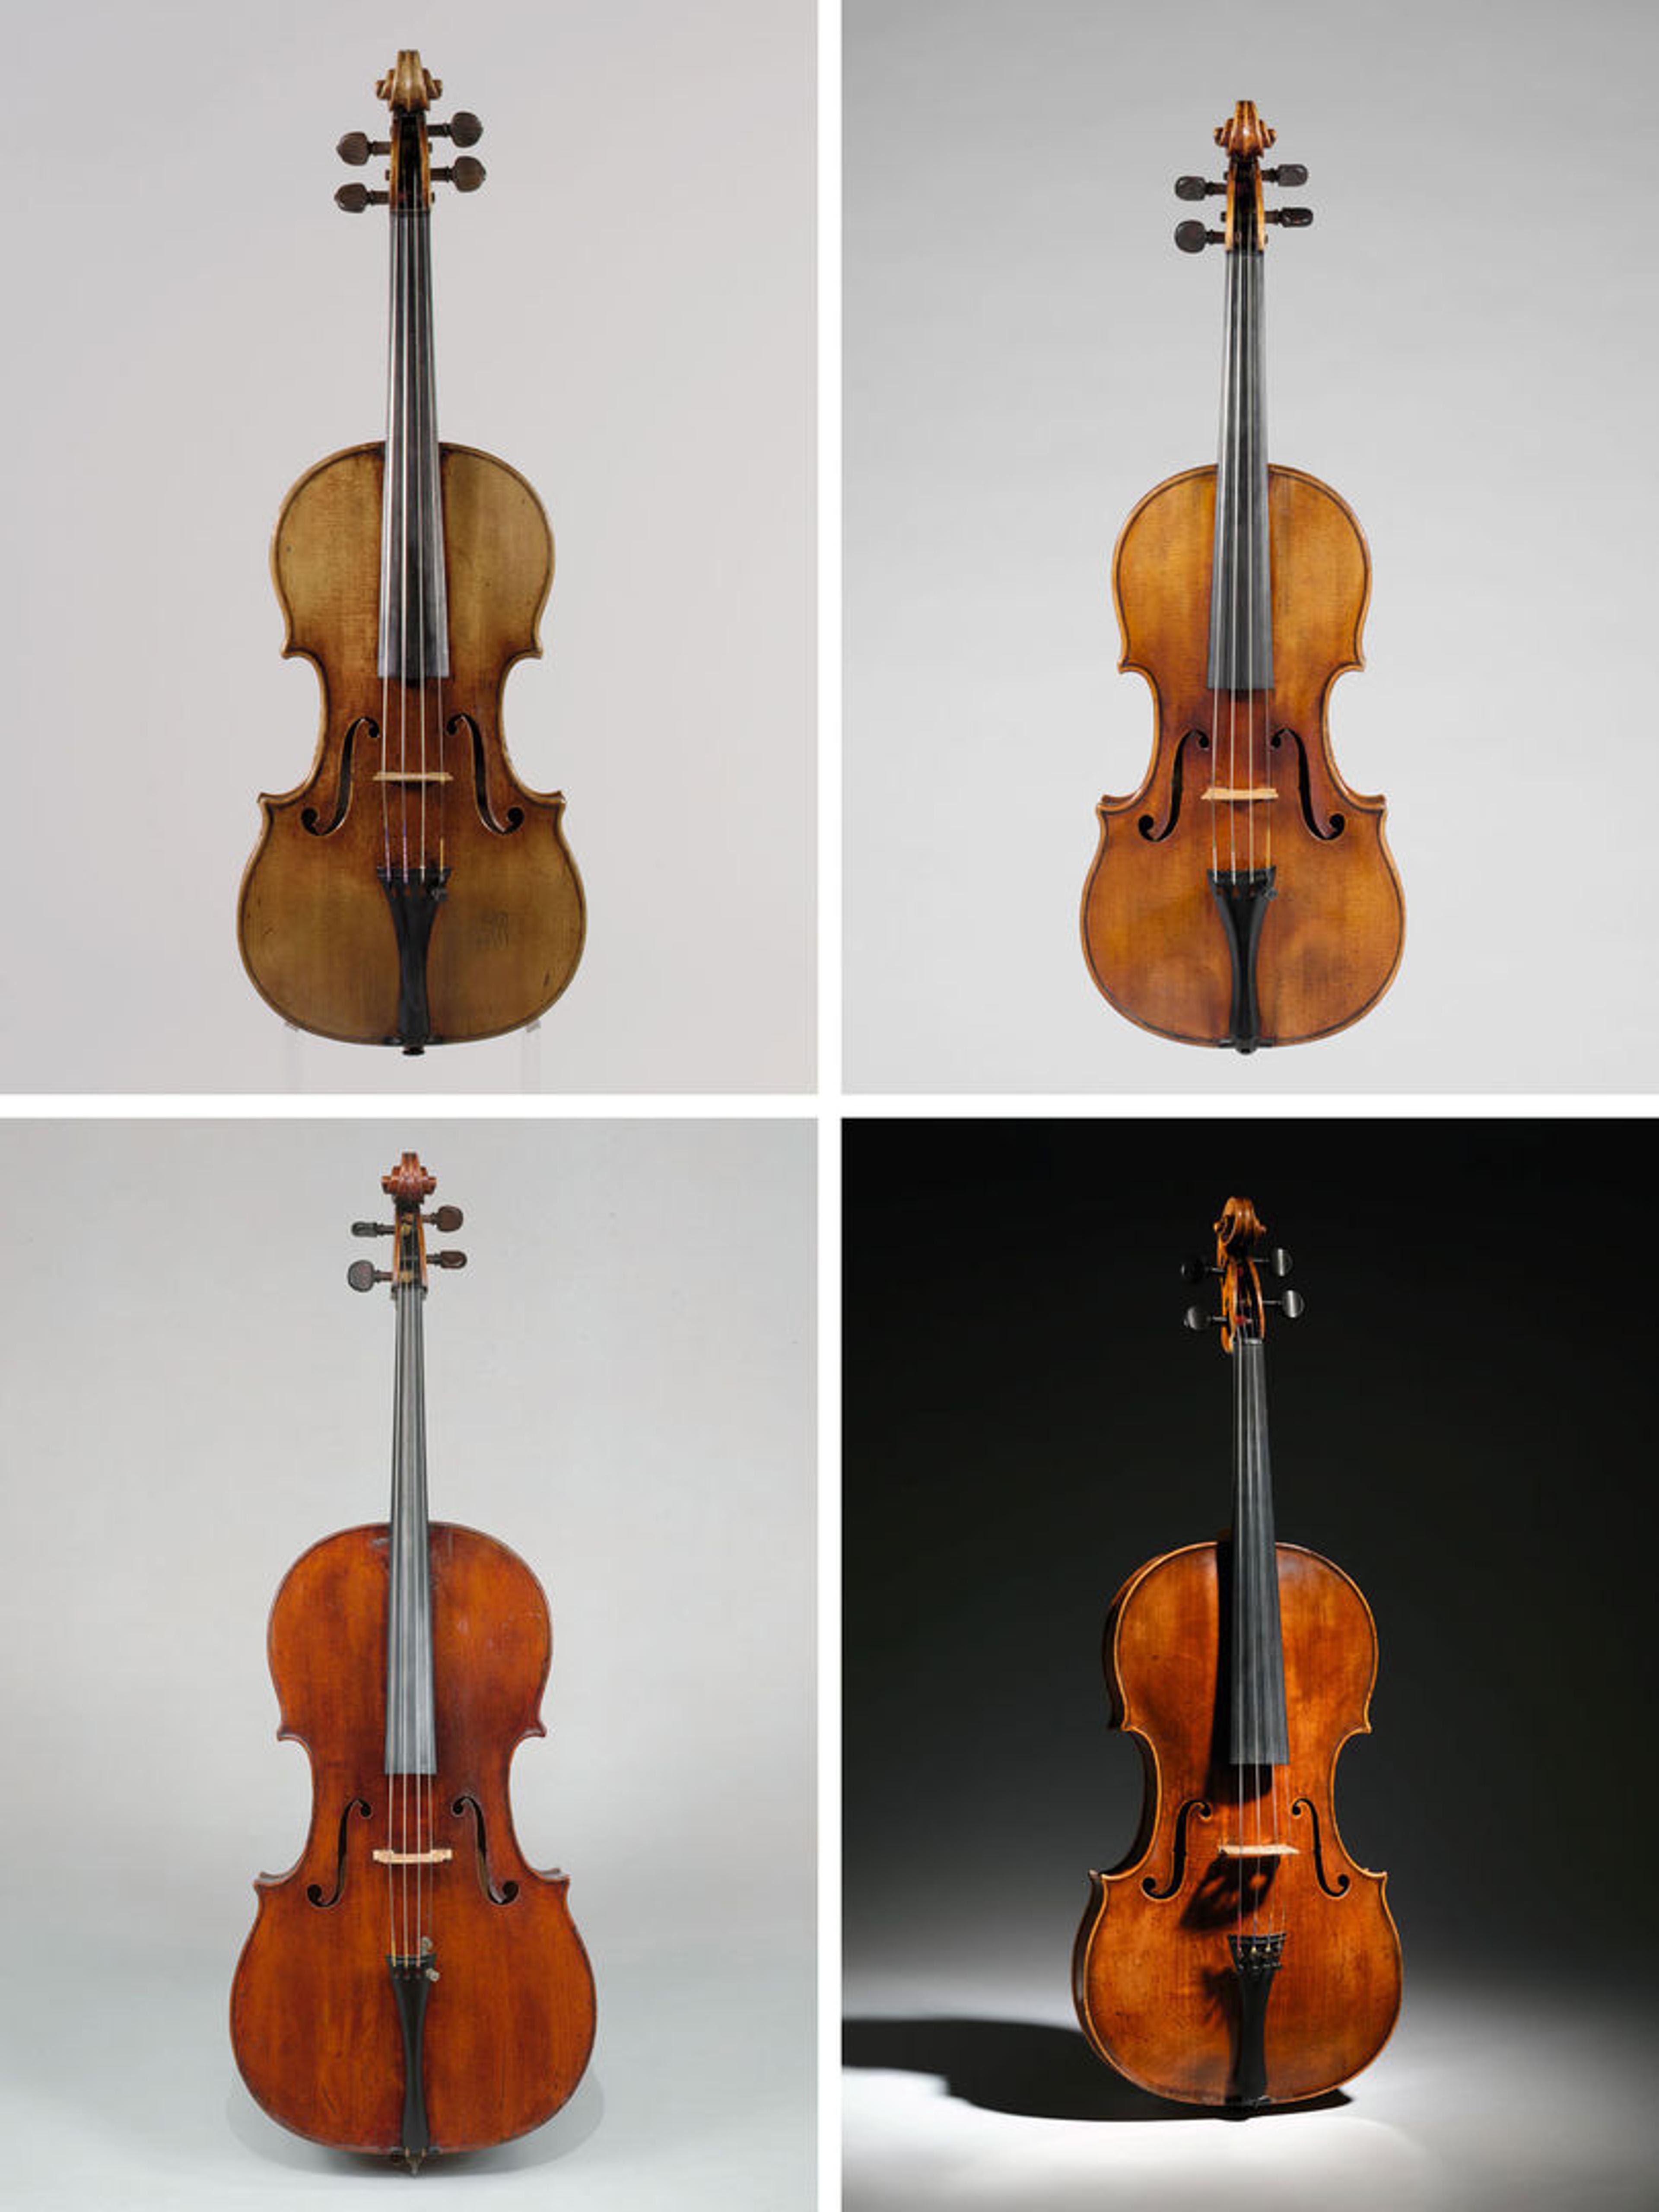 Composite image of four instruments (two violins, a viola, and a violoncello) from The Met collection